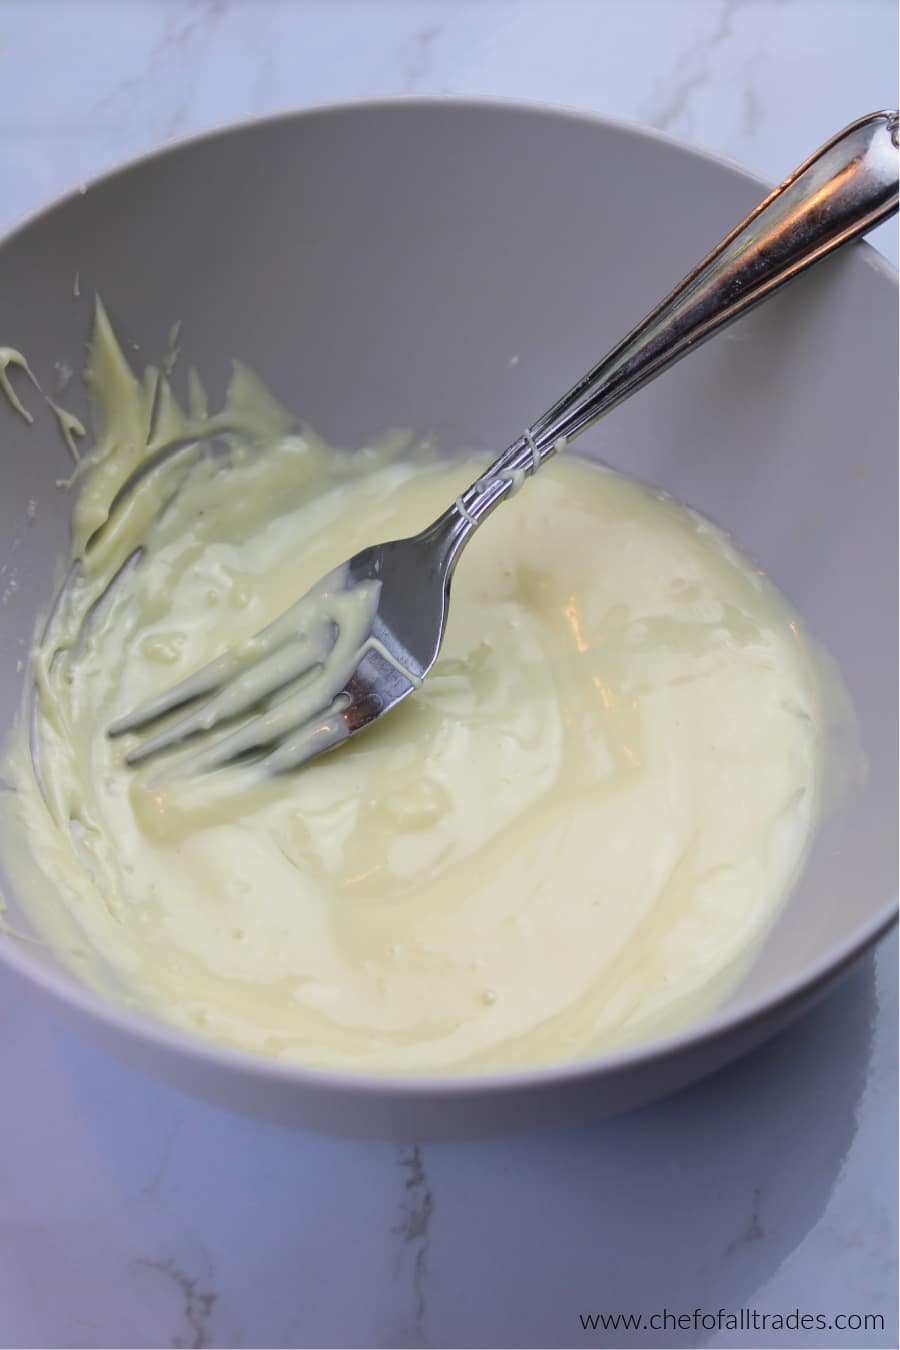 white chocolate melted in a bowl